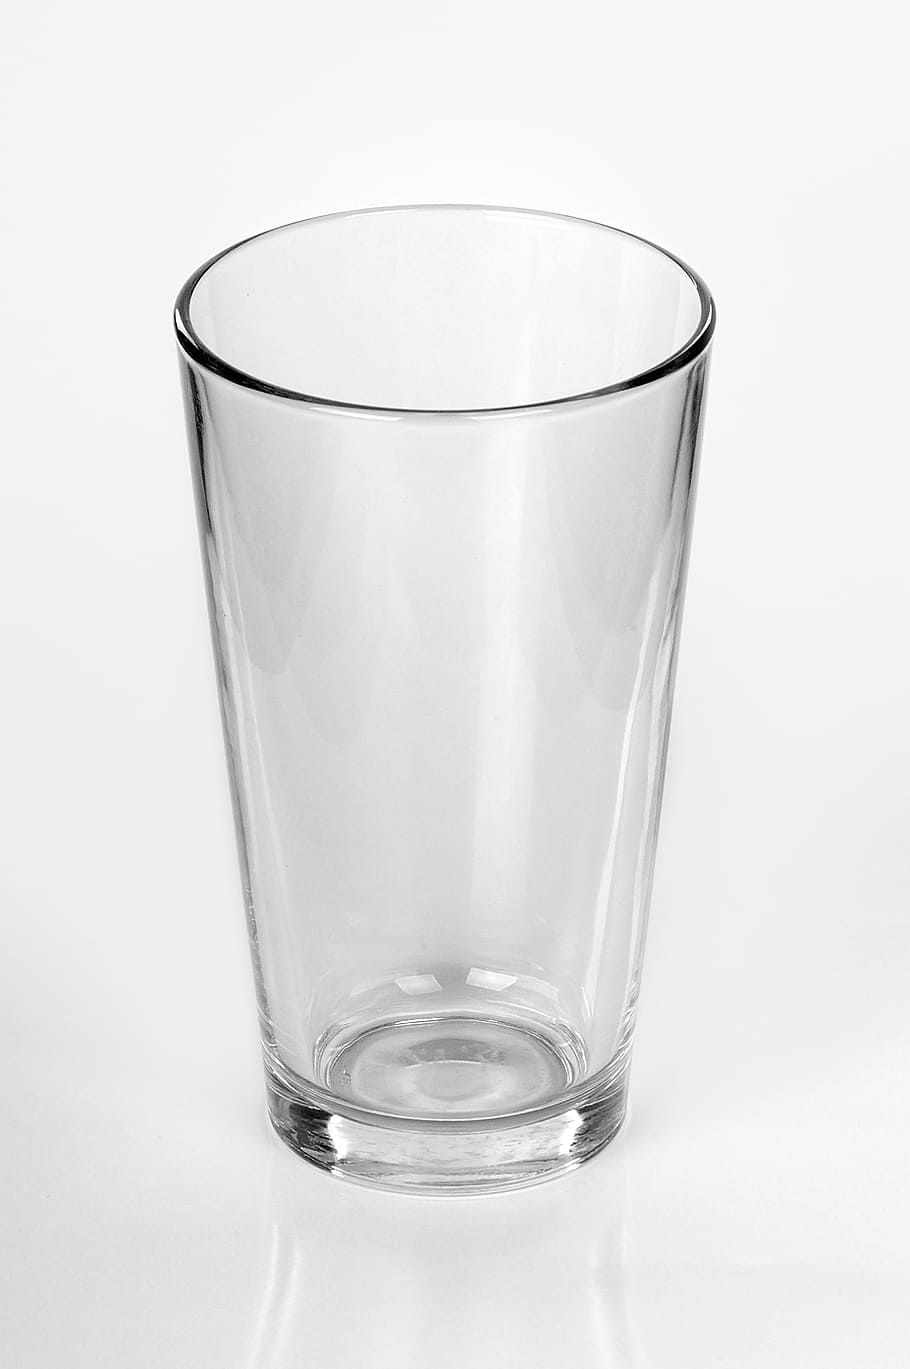 drink, liquid, drinking, cleanliness, blank, glass, beer glasses, drinking beer, empty glass, crystal